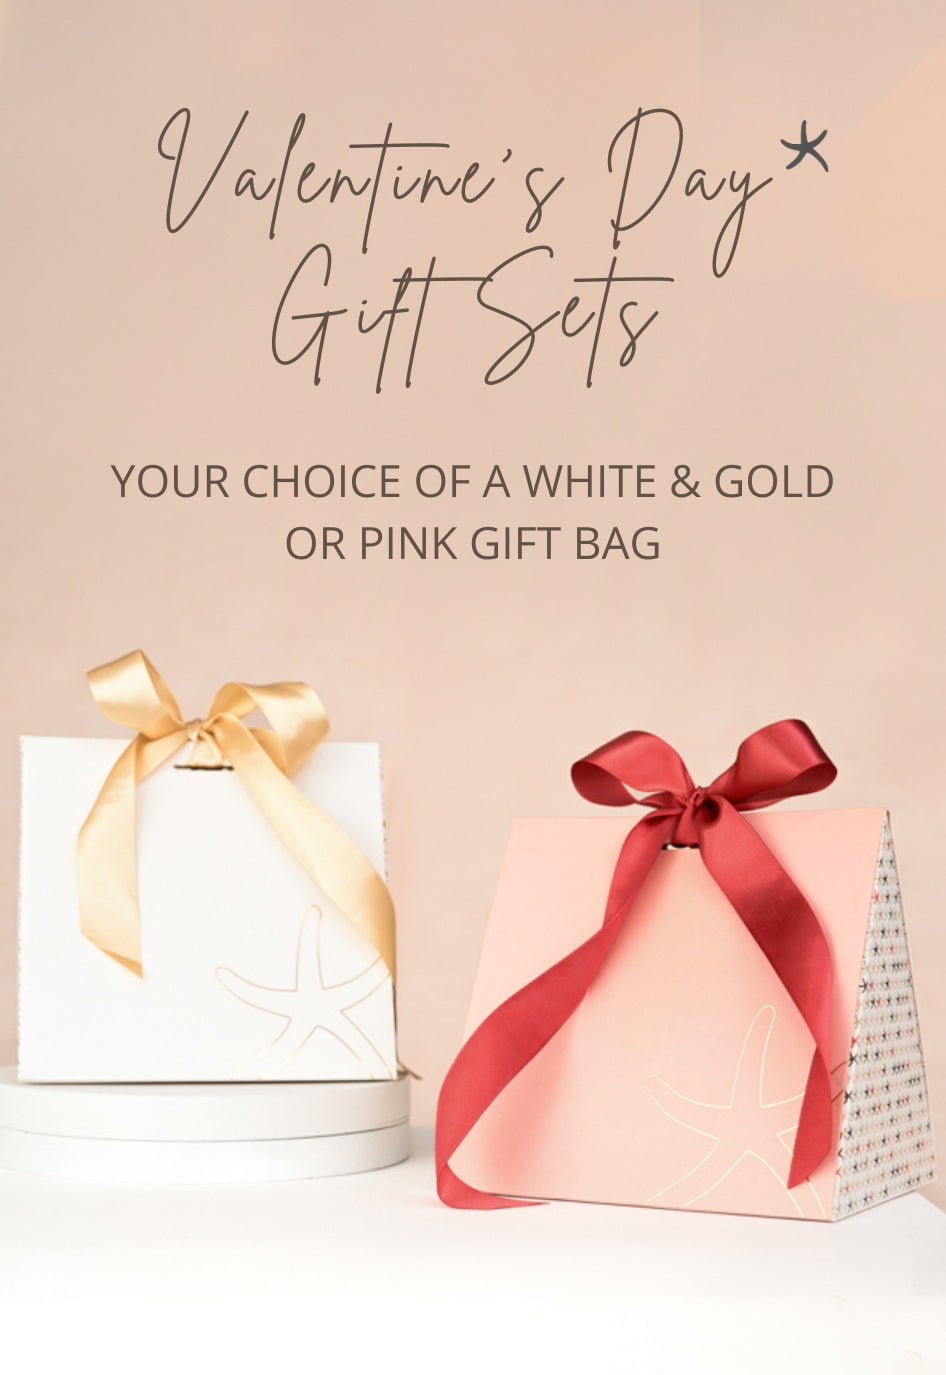 The Give Hope Gift Set in Silver